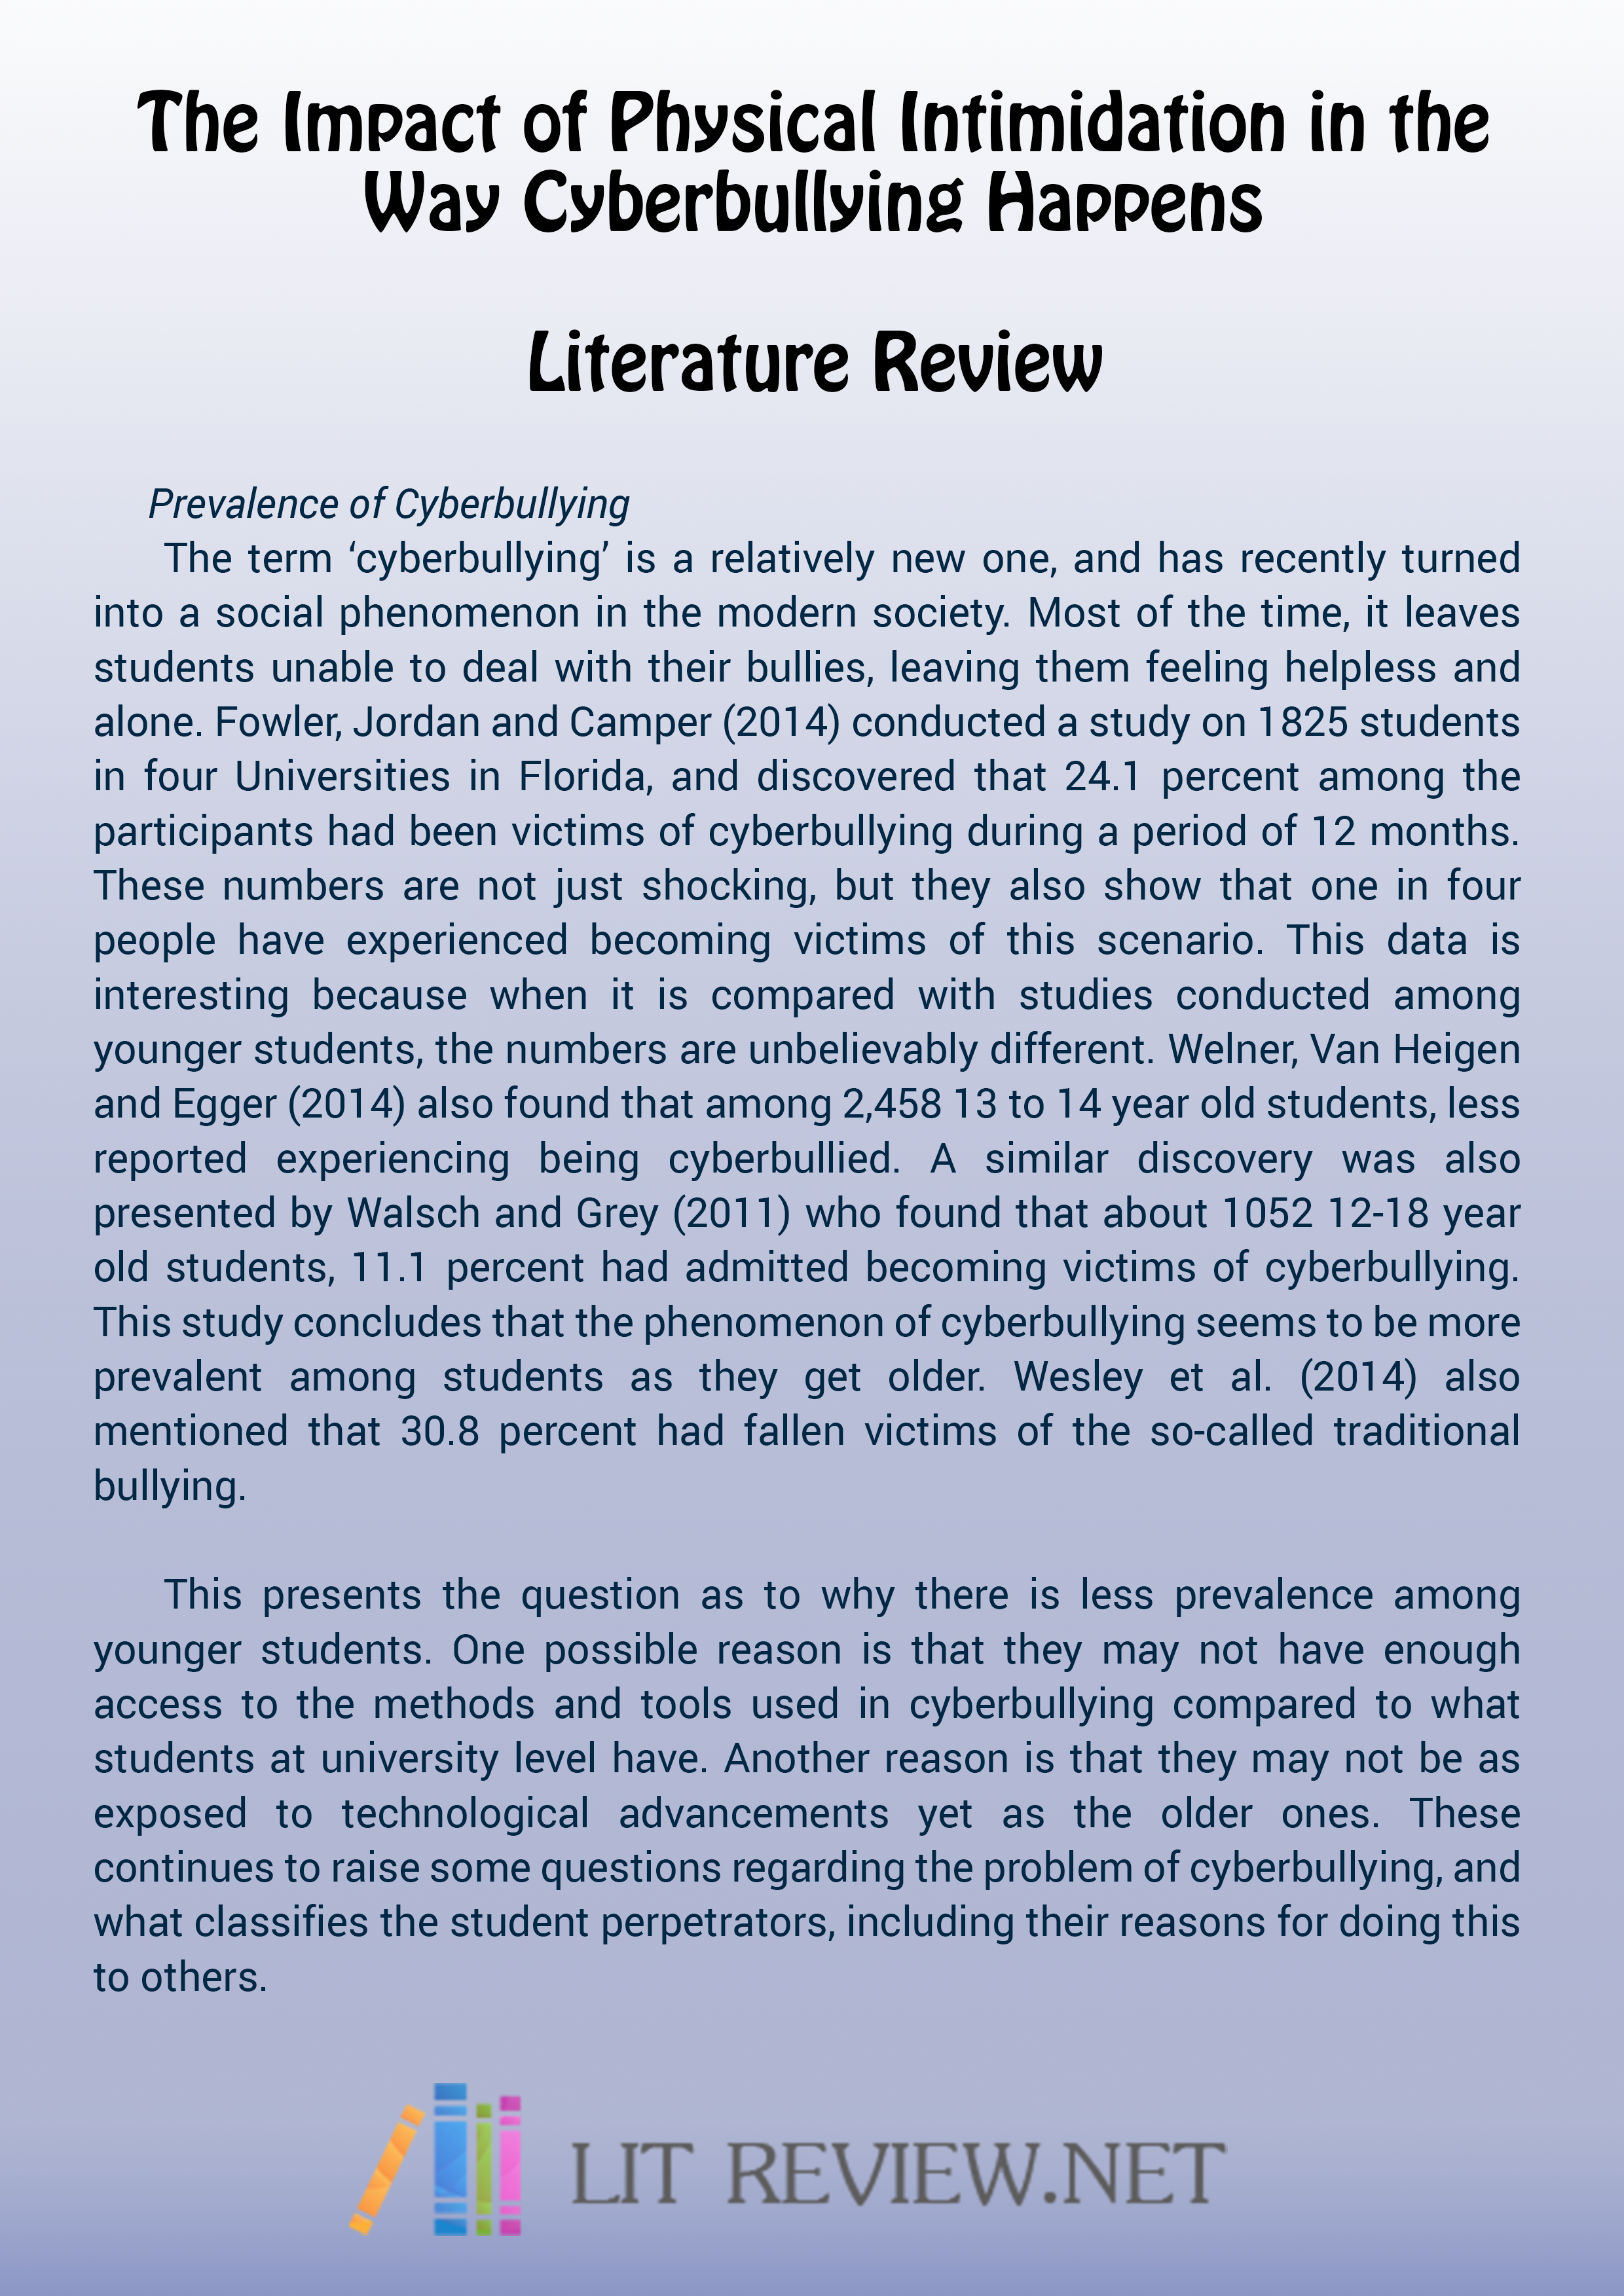 How to write a literature review for a phd dissertation